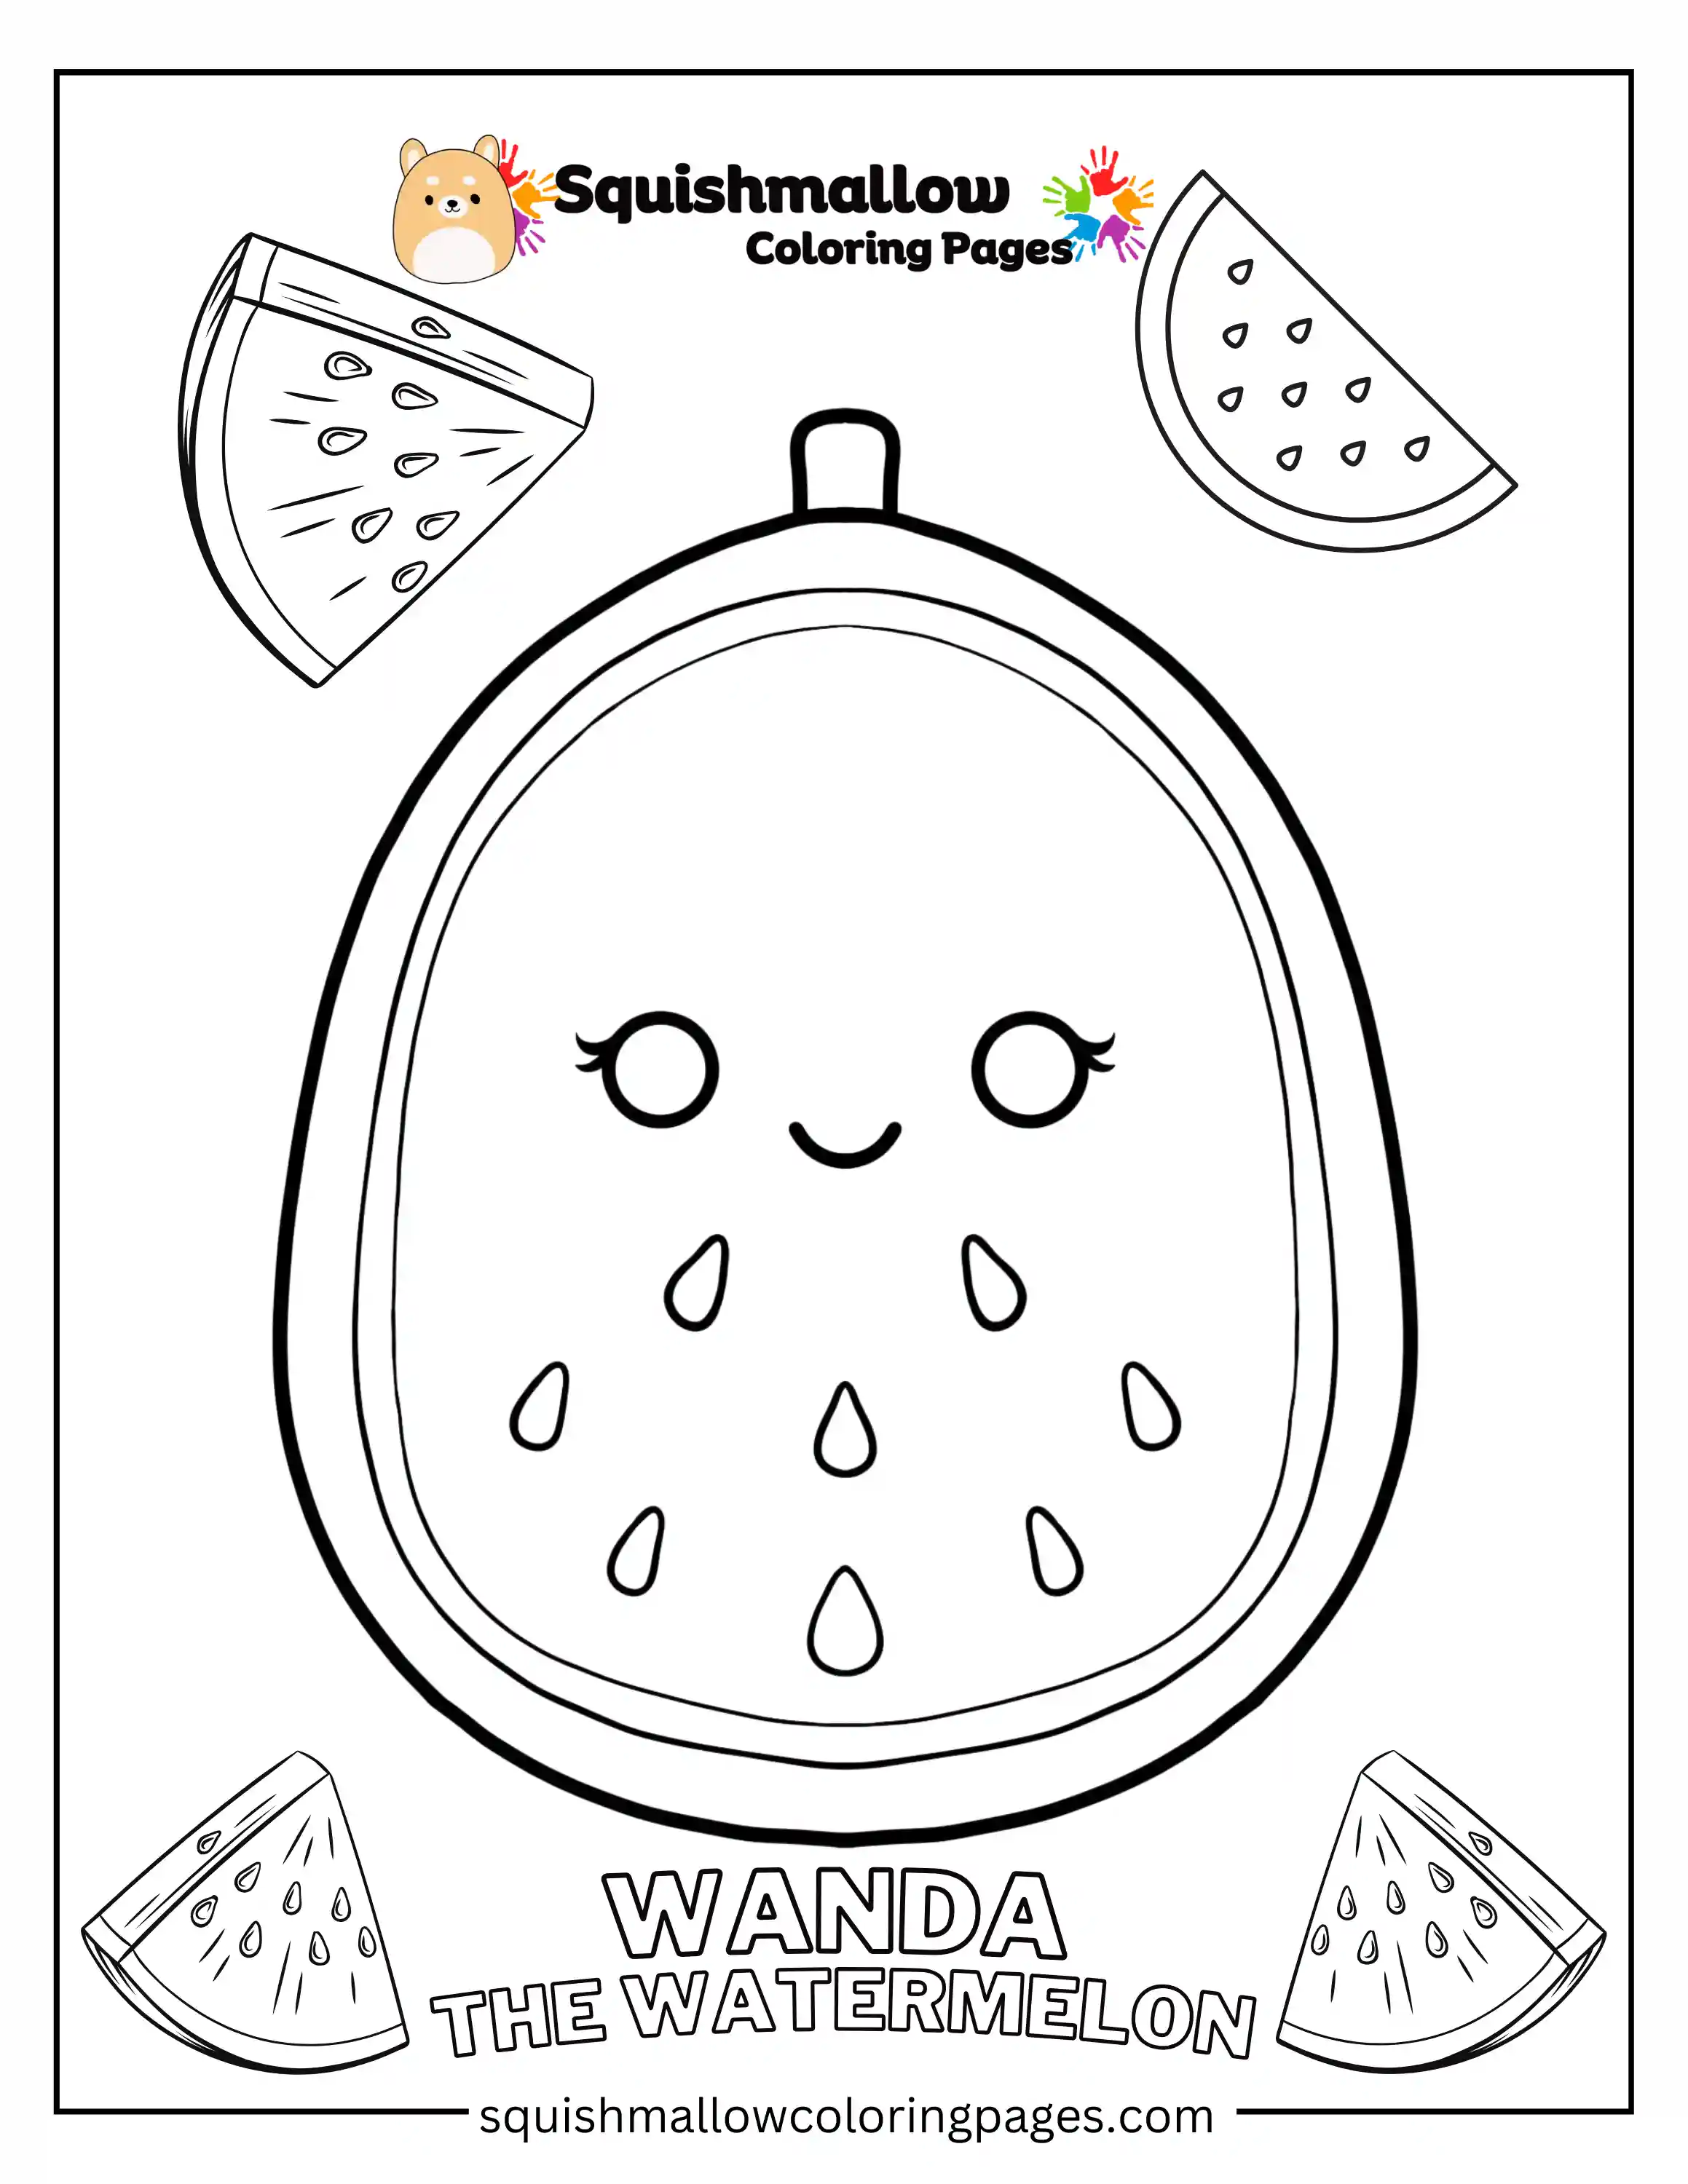 Wanda The Watermelon Squishmallow Coloring Pages